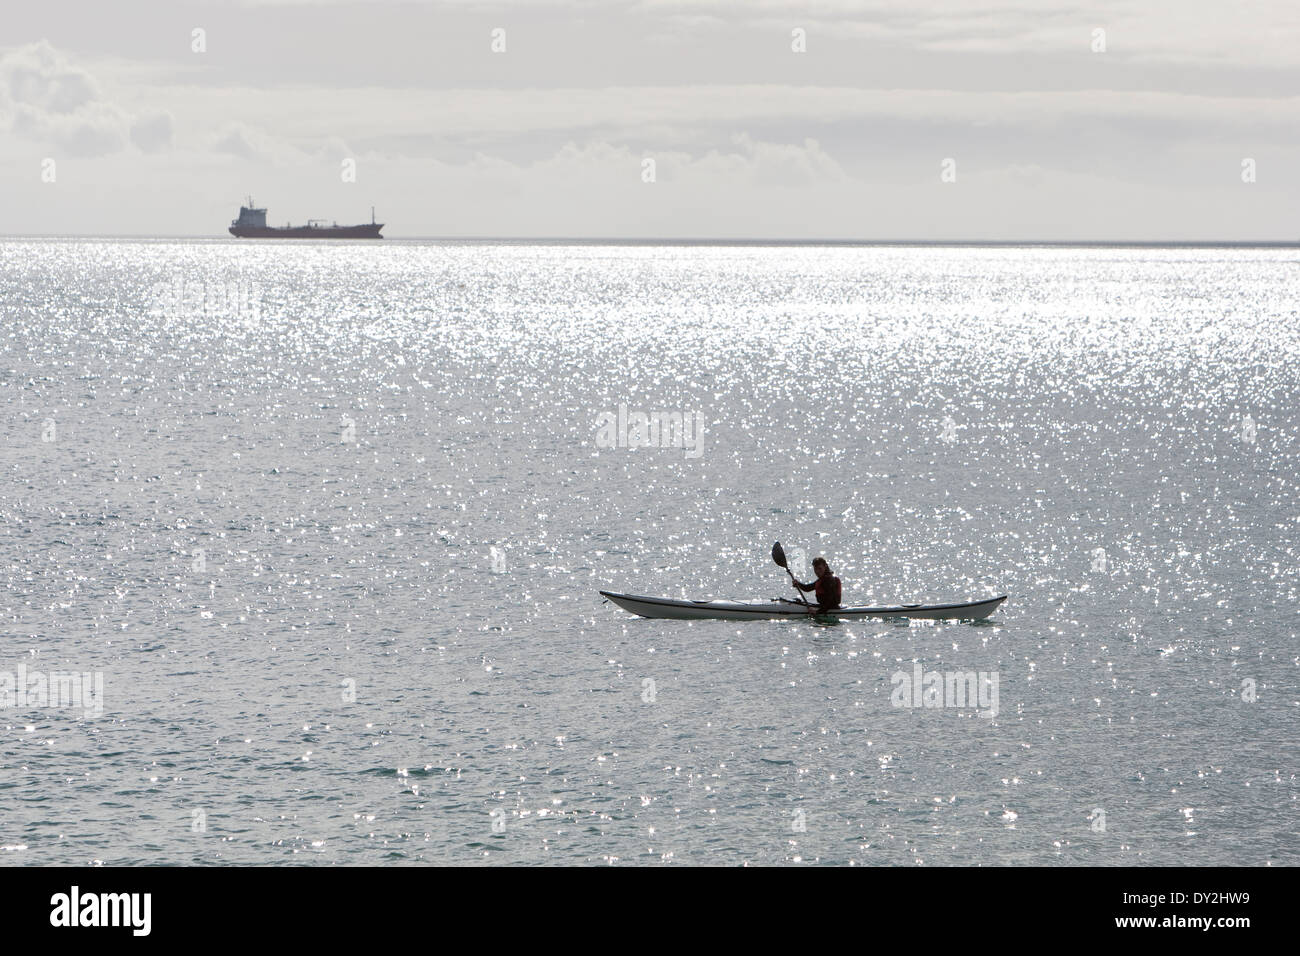 A kayaker sits in his sea kayak off Maenporth beach, Falmouth while a ship sits on the horizon. Stock Photo